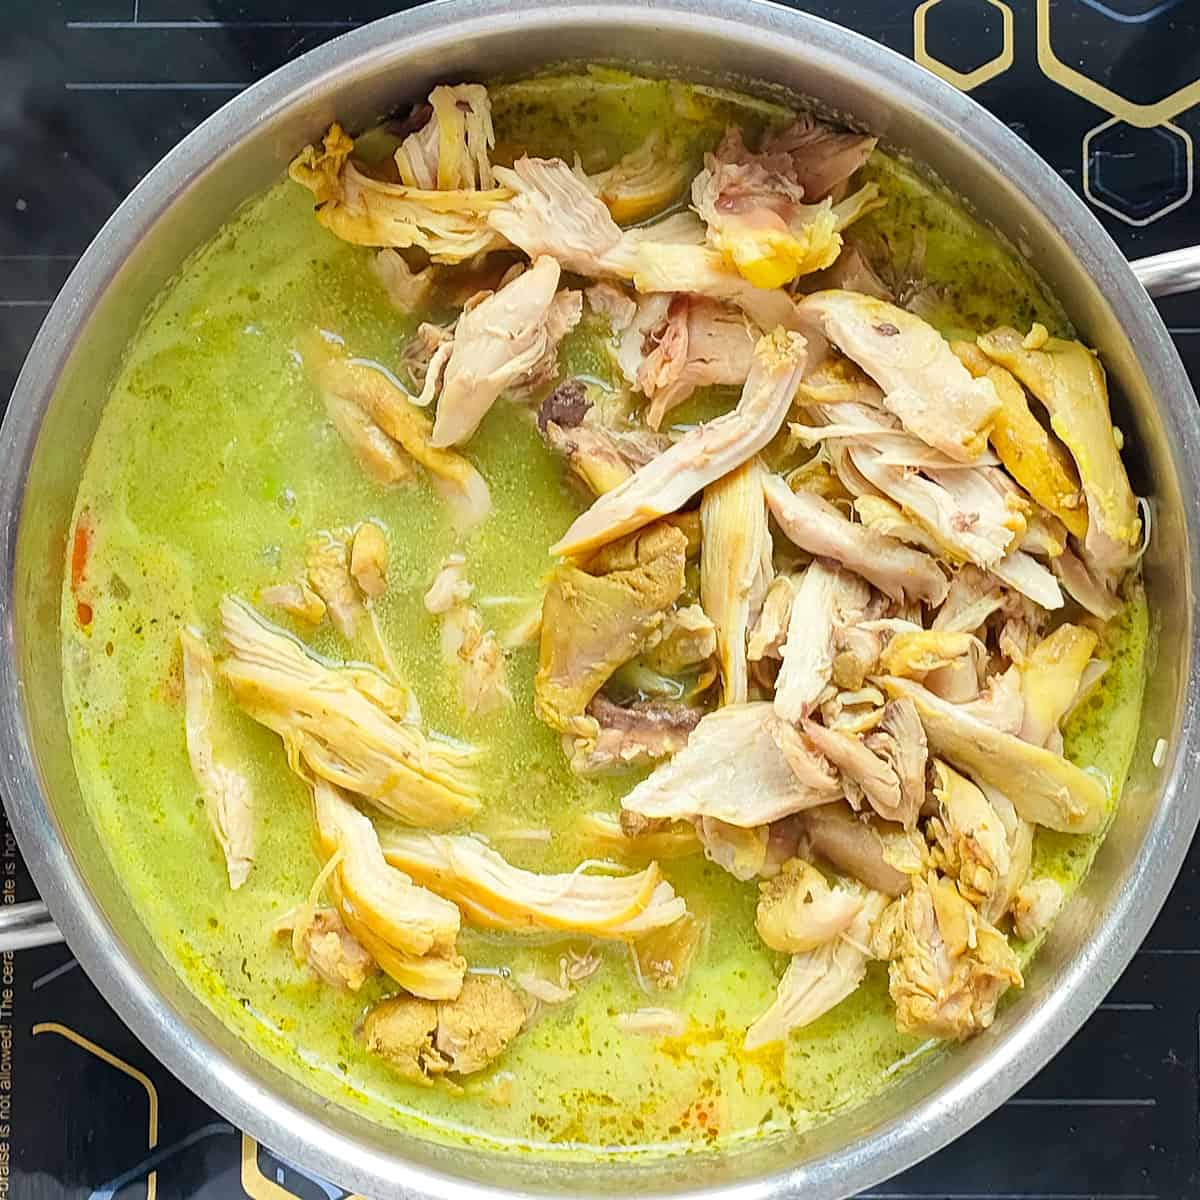 Coriander lemon soup with chicken in a white and blue bowl.